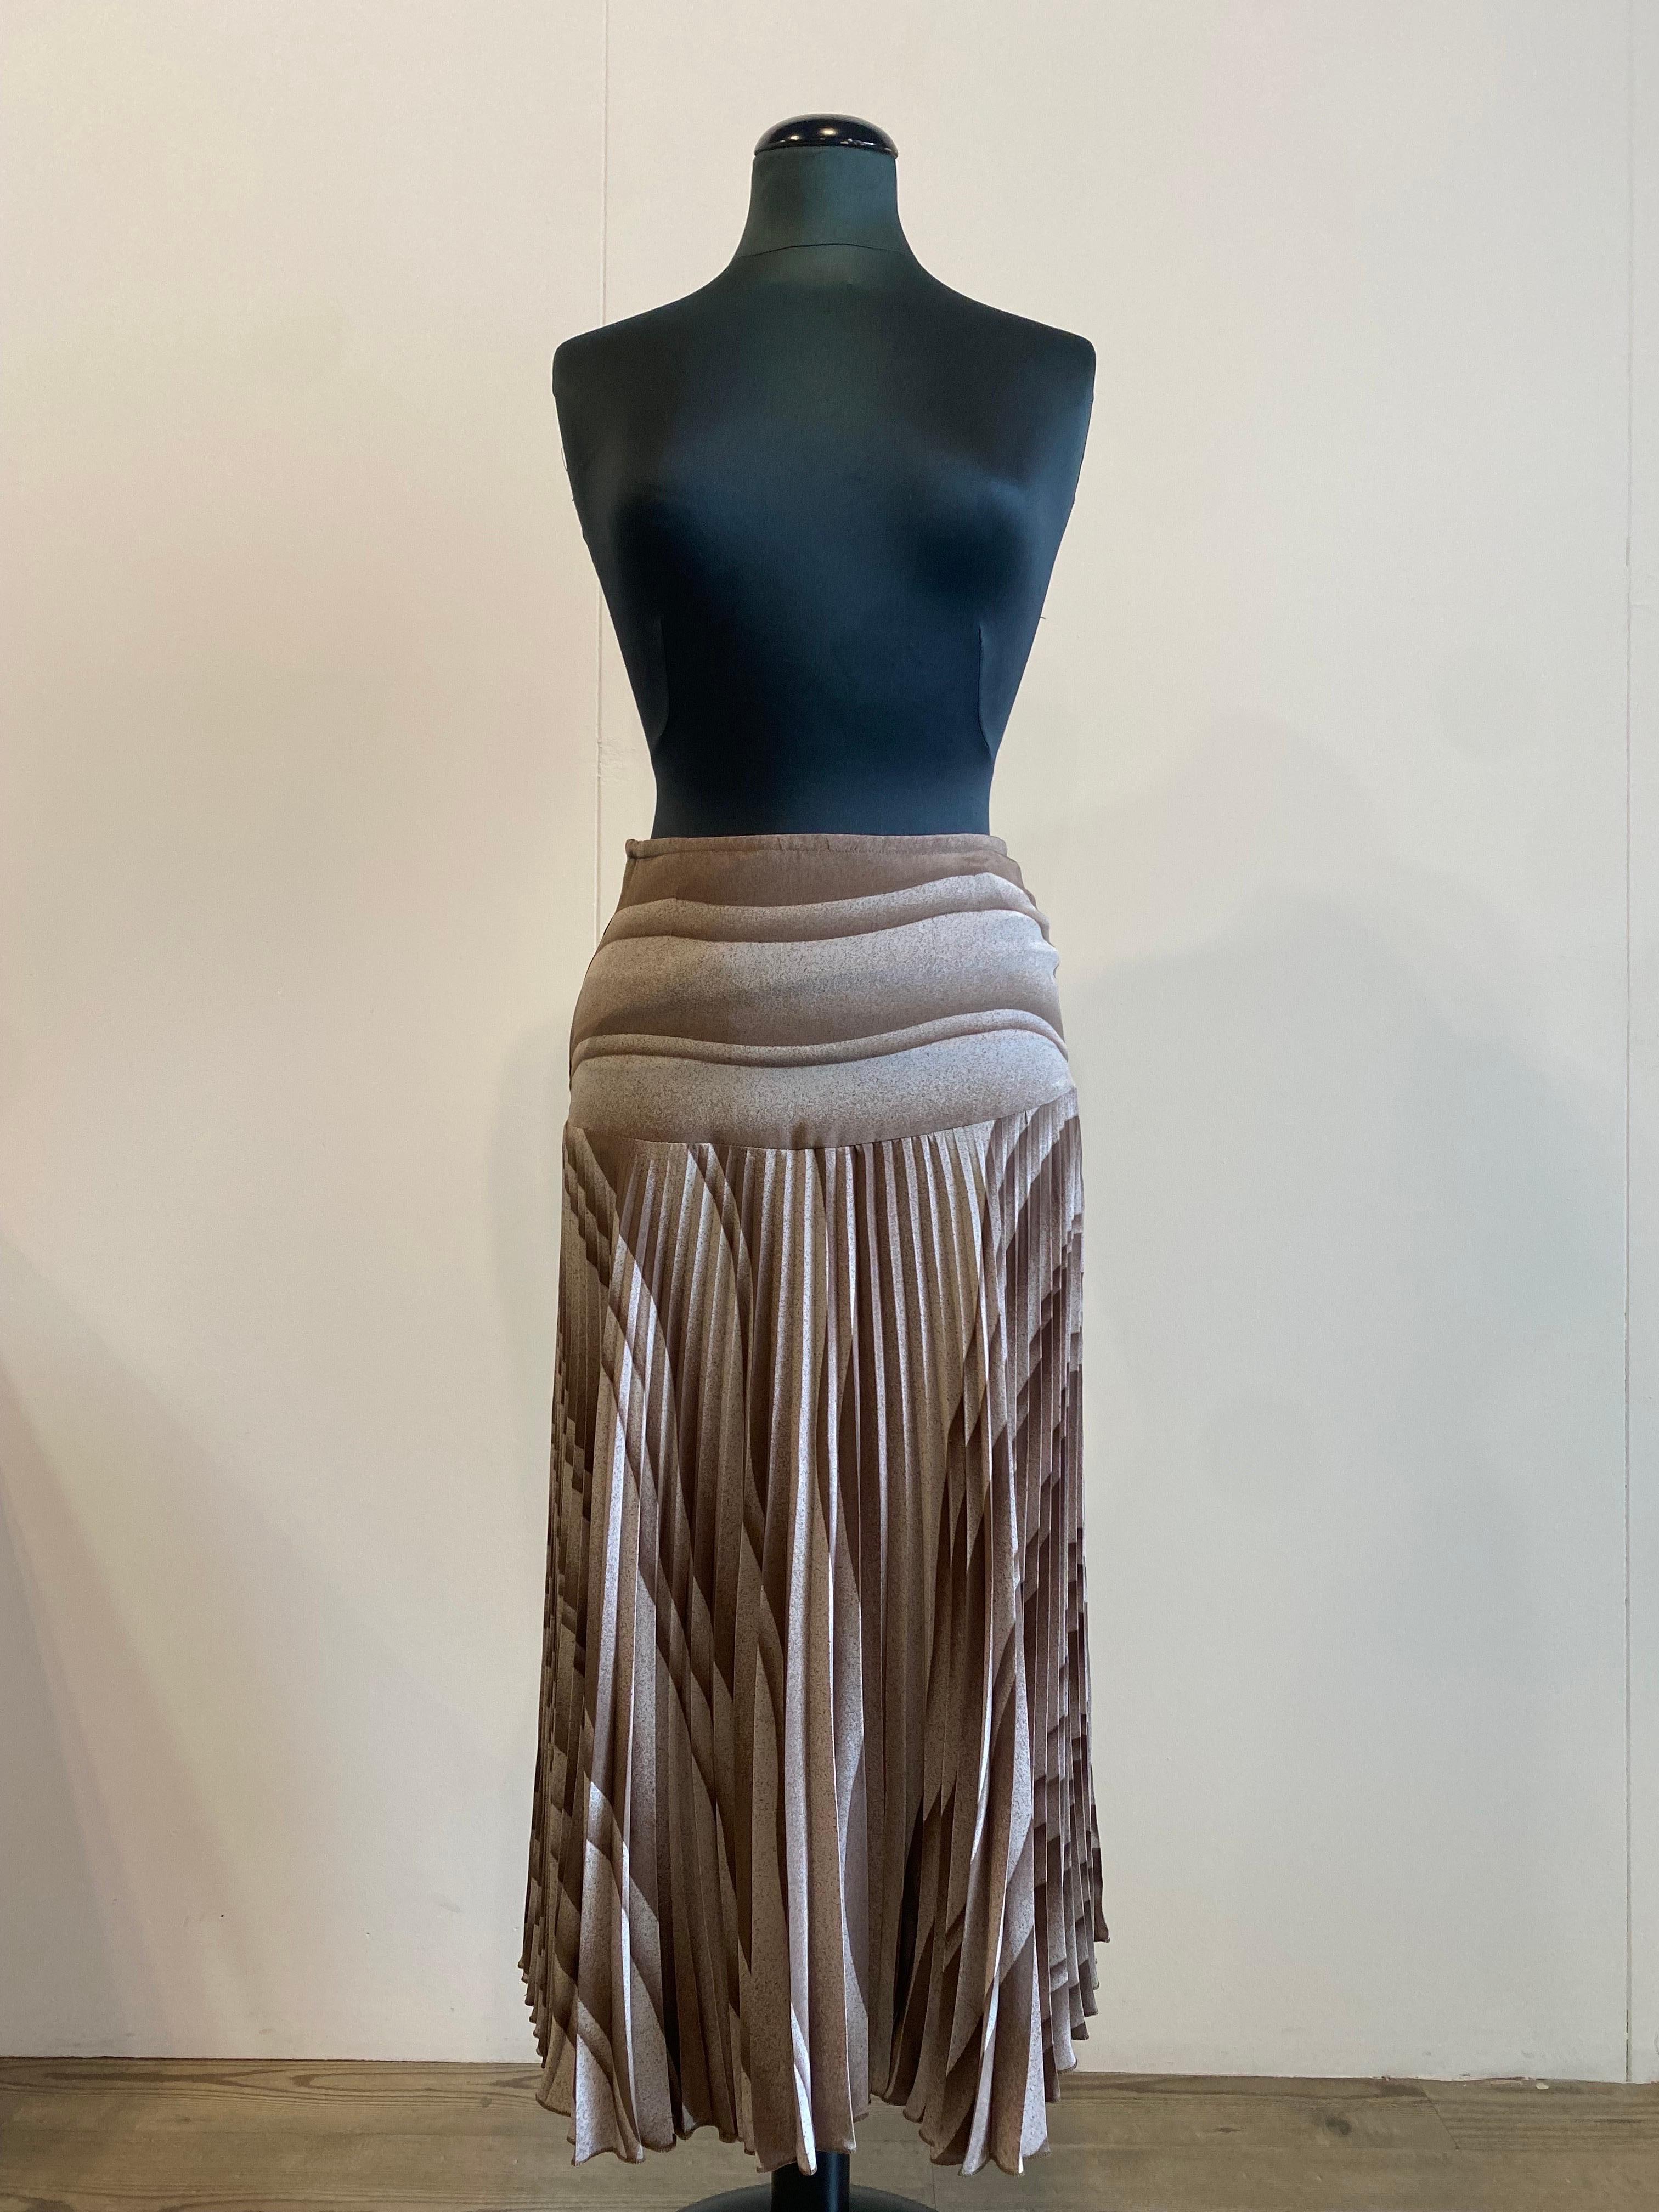 Valentino Boutique skirt
Pattern in beige-brown tones.
Pleated silk skirt, composition label no longer present.
Size not listed, label missing.
Waist 35
Length 78
hips 45